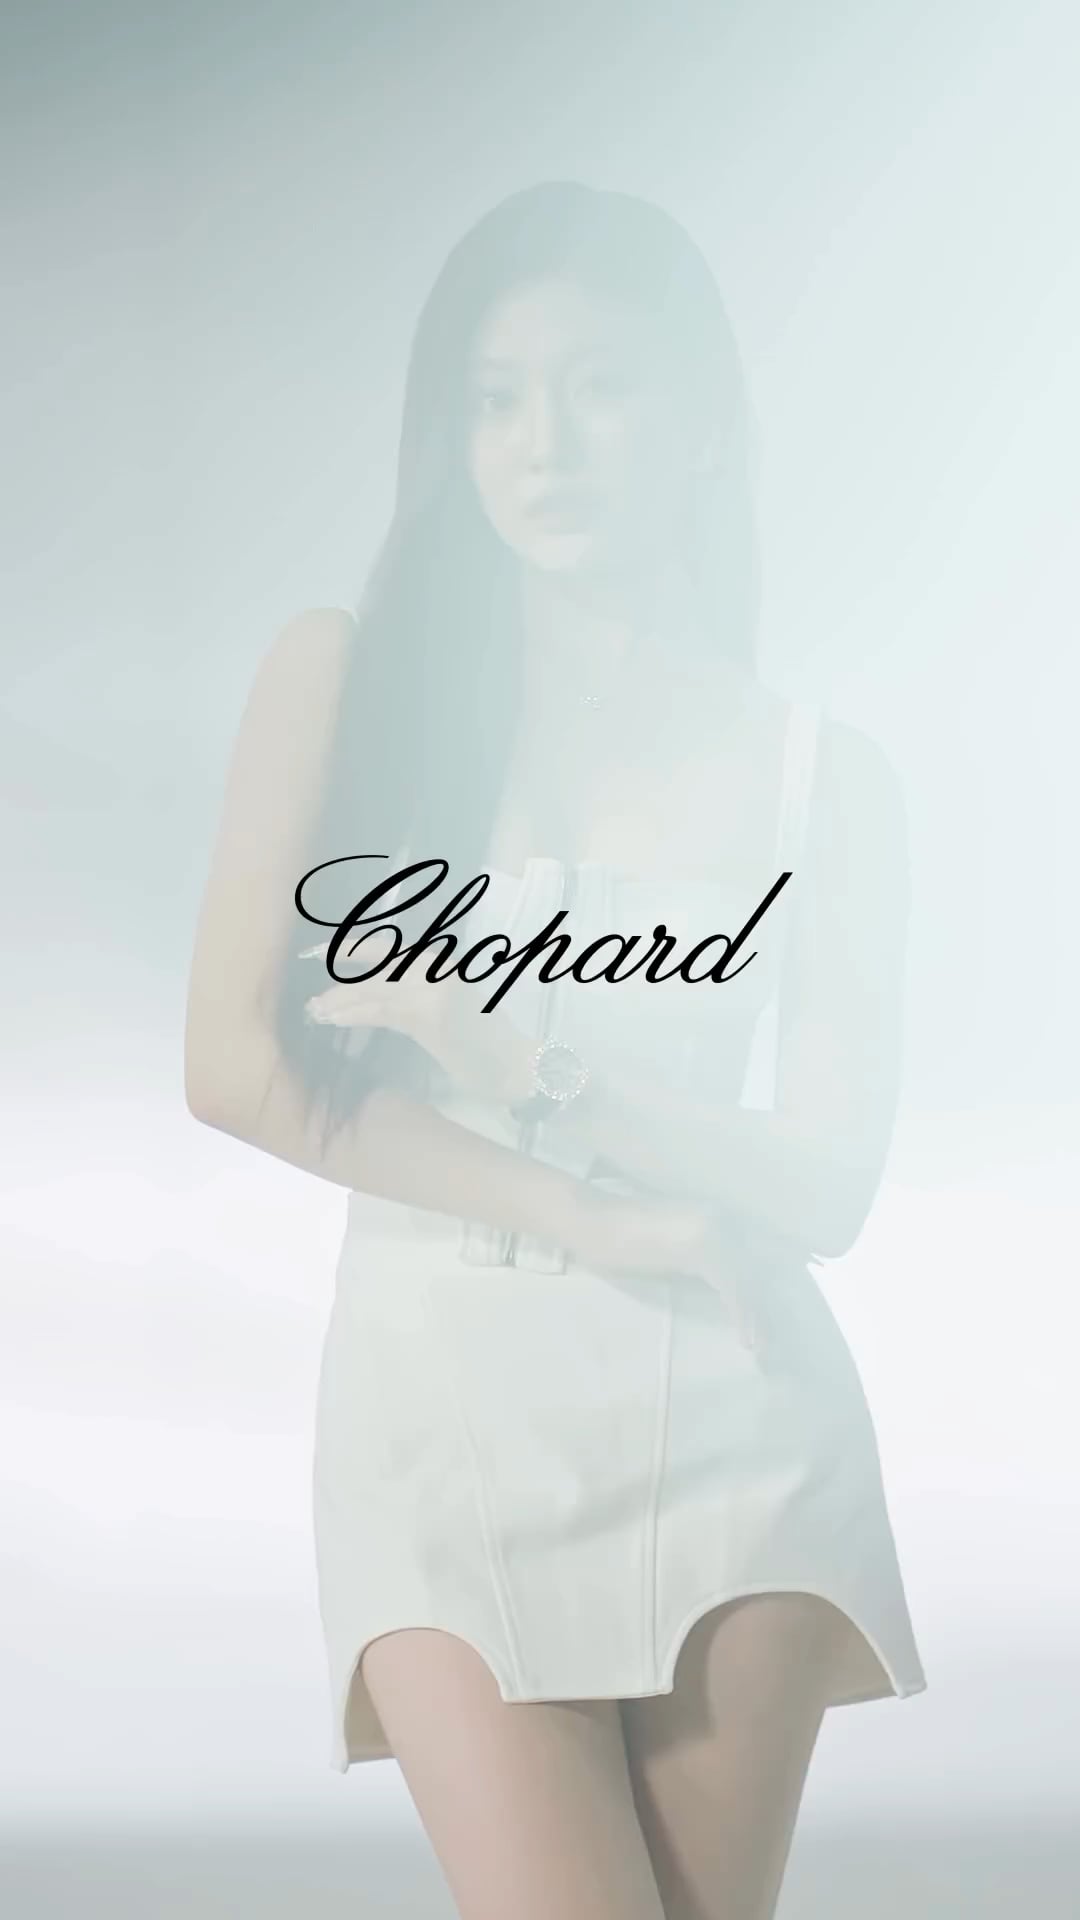 240121 aespa for Chopard (Promotional Video - Winter & Ningning)